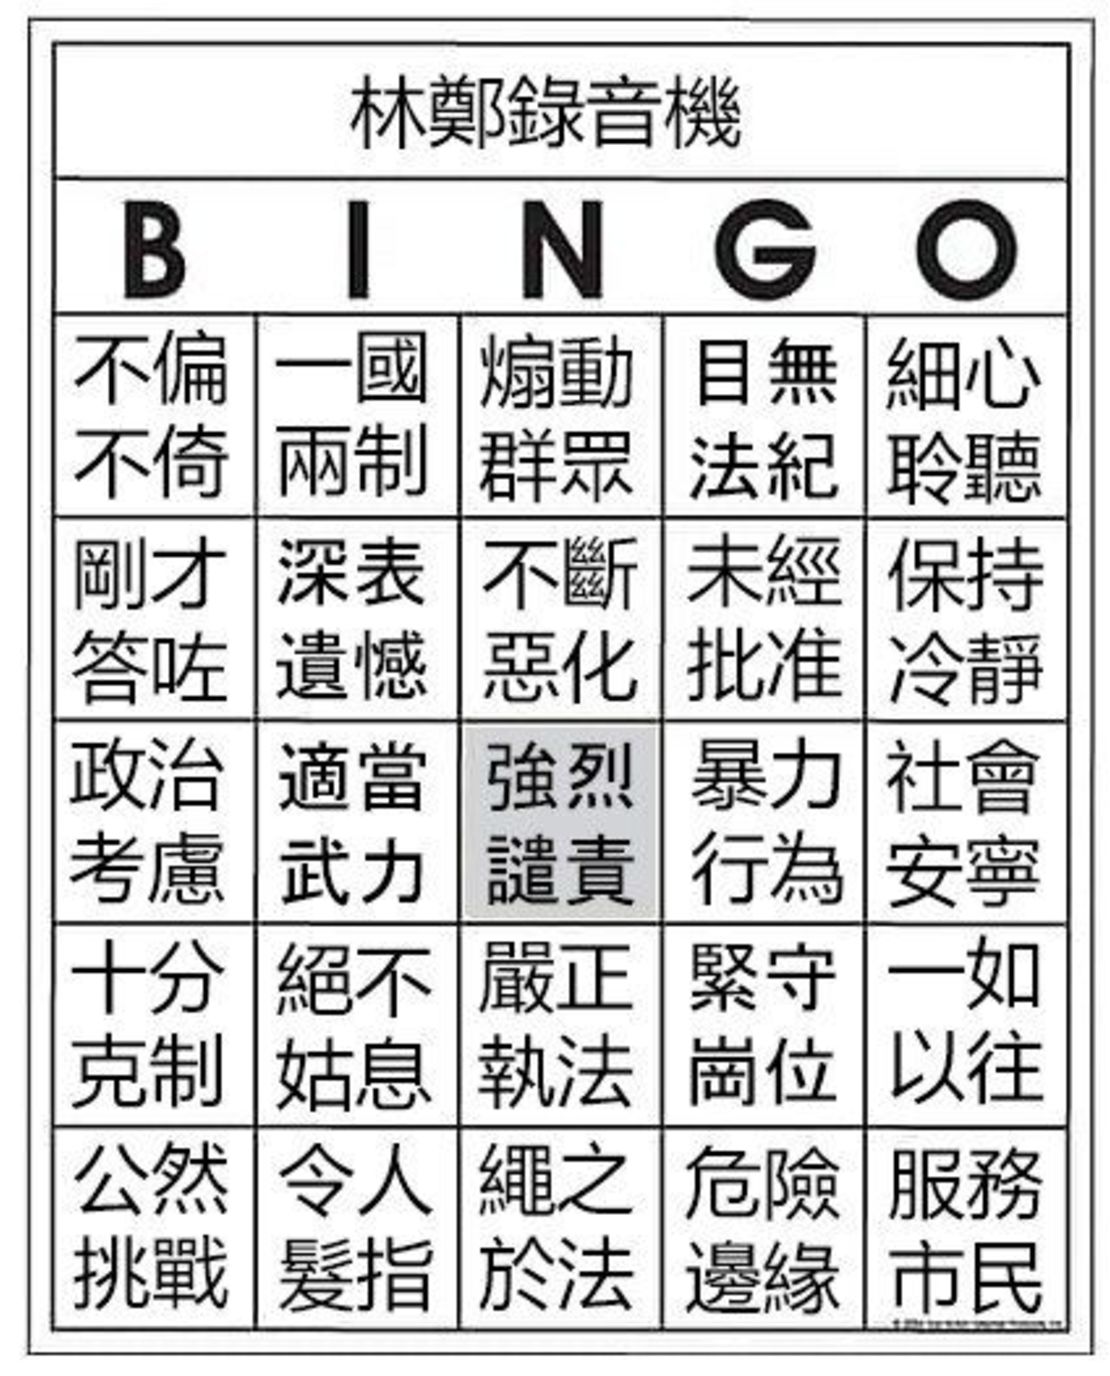 Ahead of Chief Executive Carrie Lam speaking to press in August, protesters created a Bingo card guessing what she might say. 